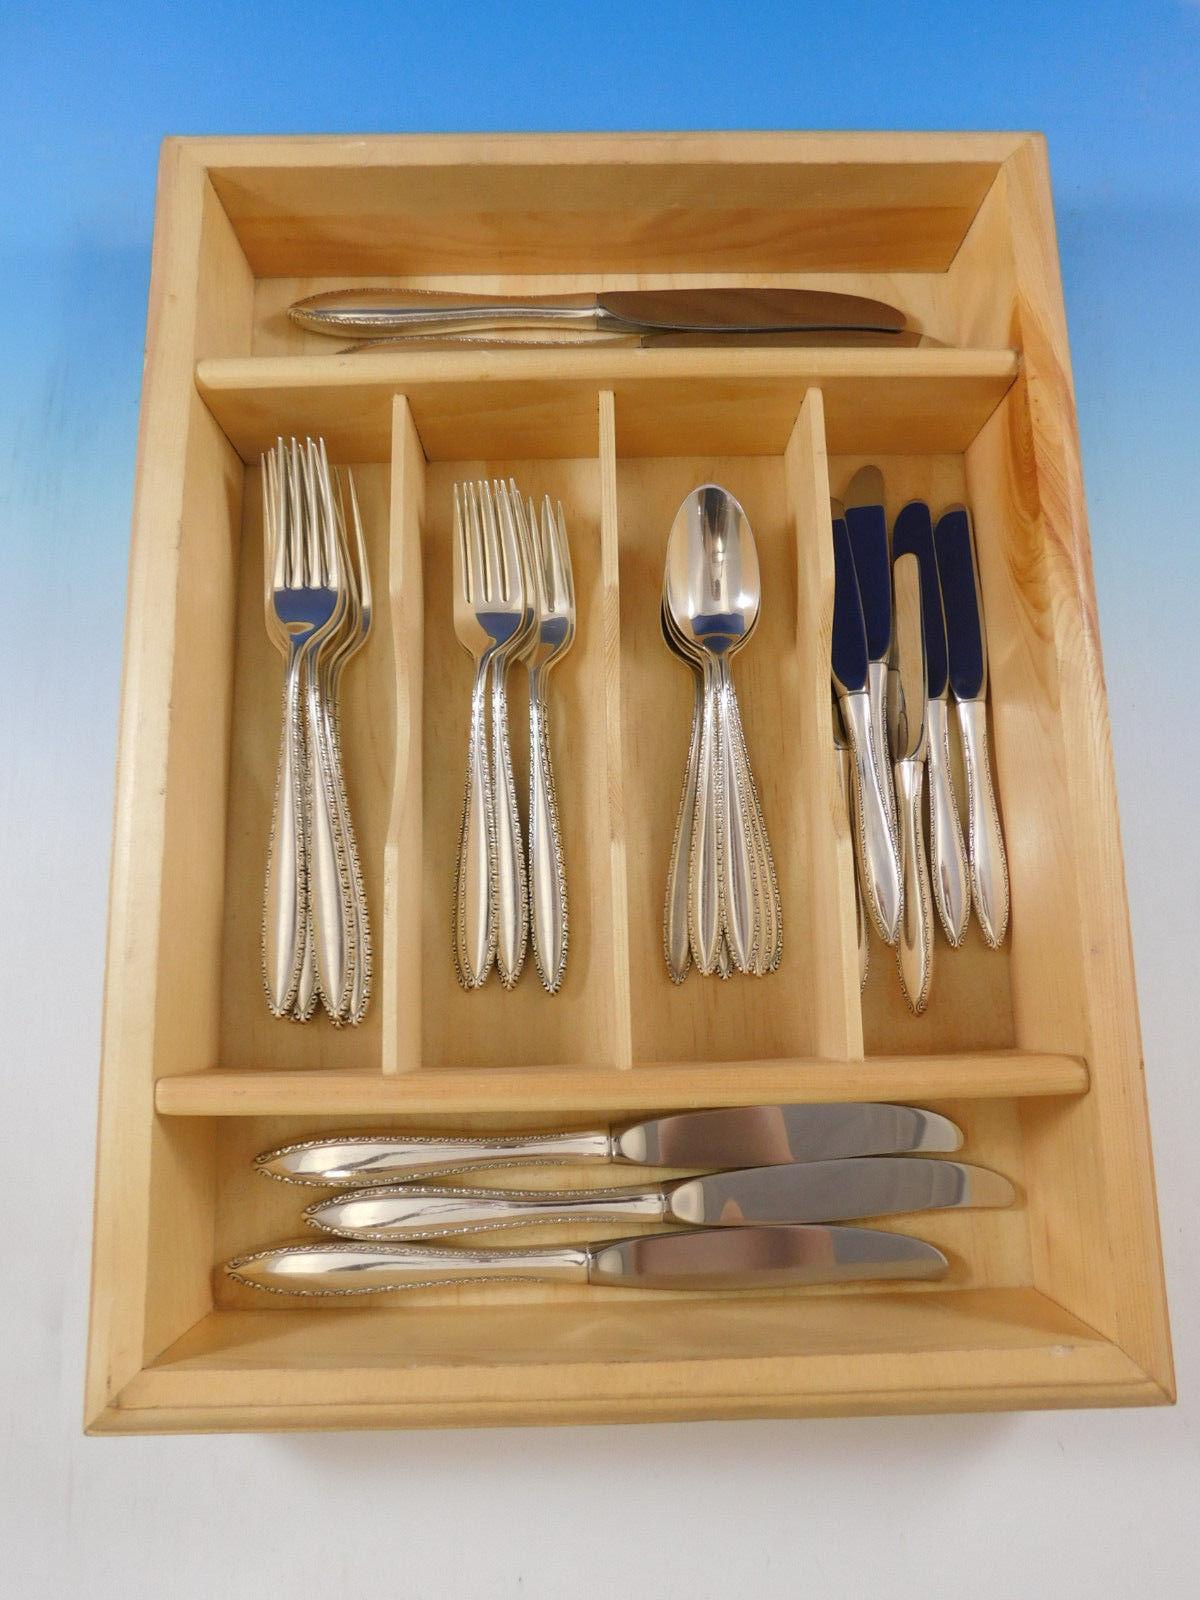 Michele by Wallace, circa 1968 sterling silver flatware set, 30 pieces. Great starter set! This set includes:

6 knives, 9